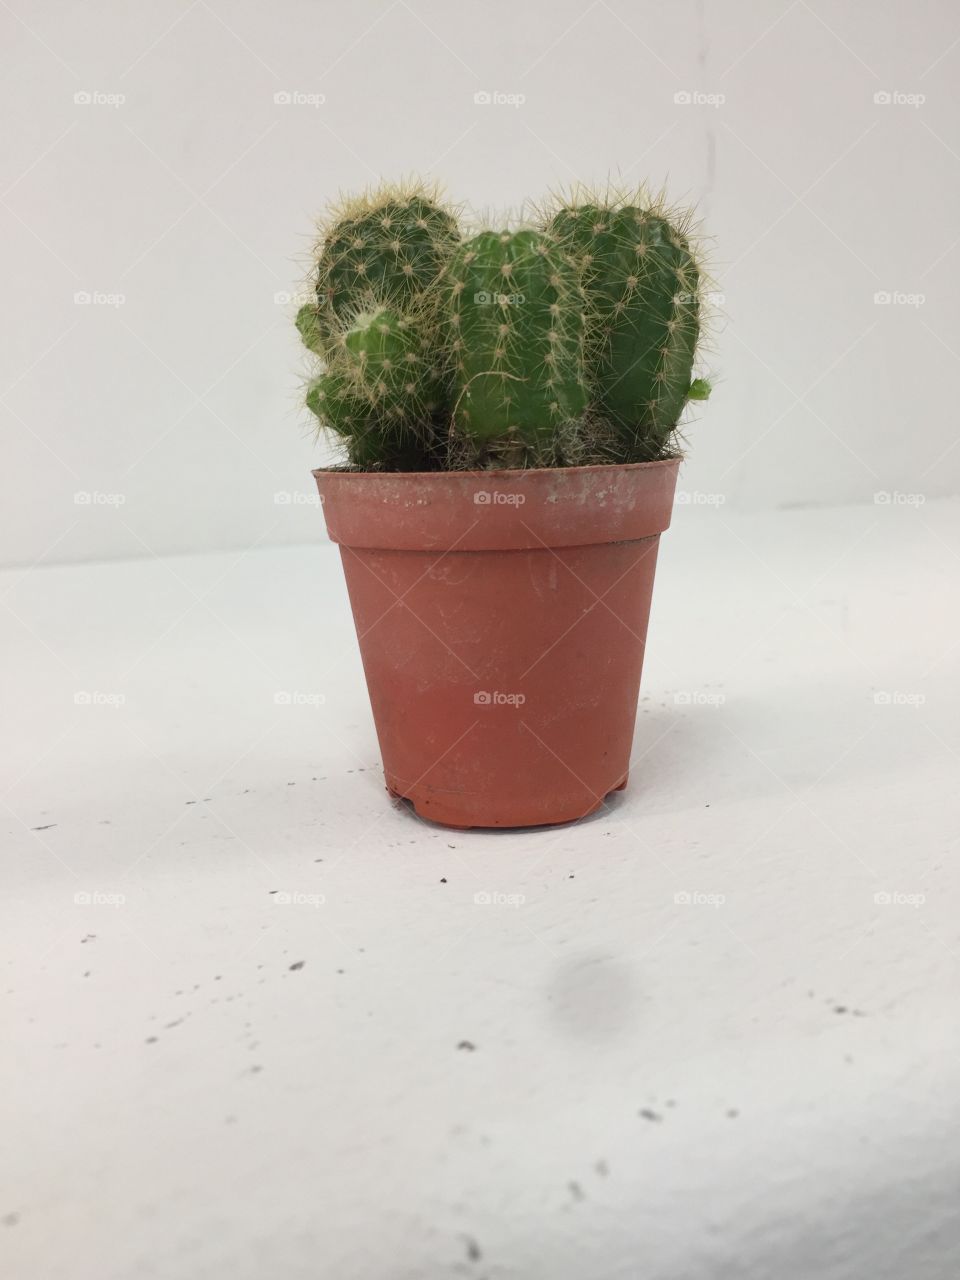 Cactus on a white background